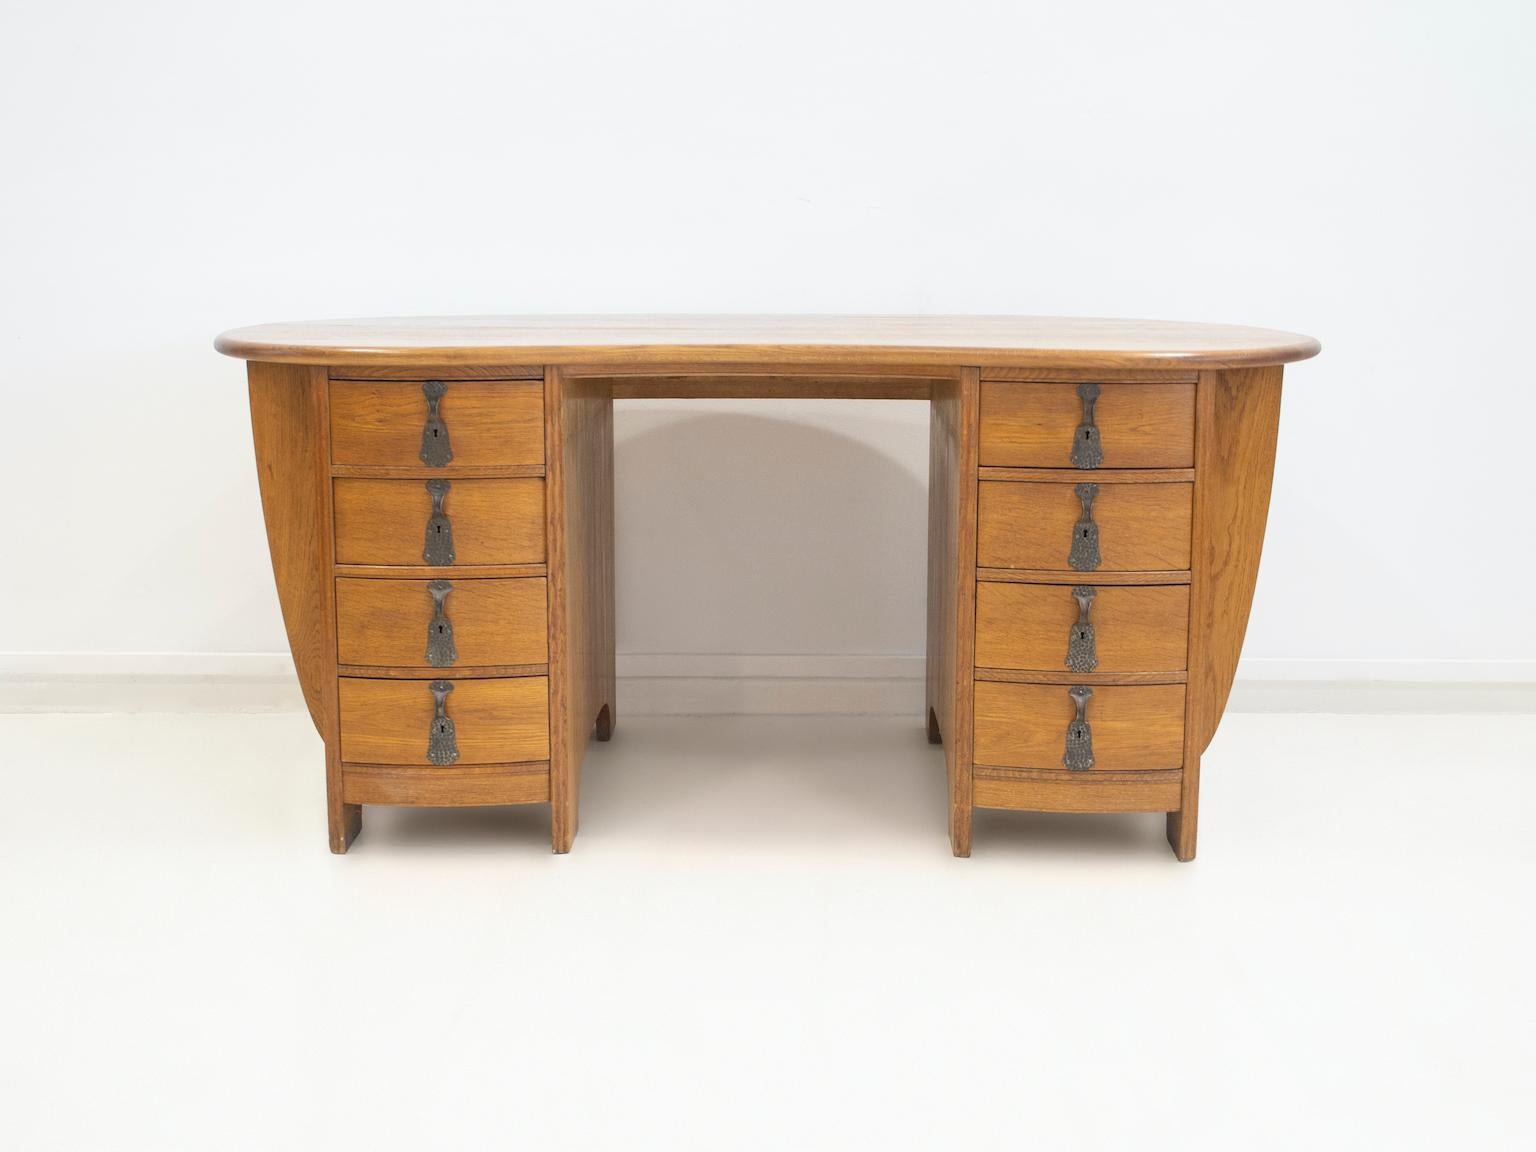 Kidney-shaped oak writing desk with double chest of drawers with 8 drawers on each side. Wrought iron handles. Sides with magazine racks.